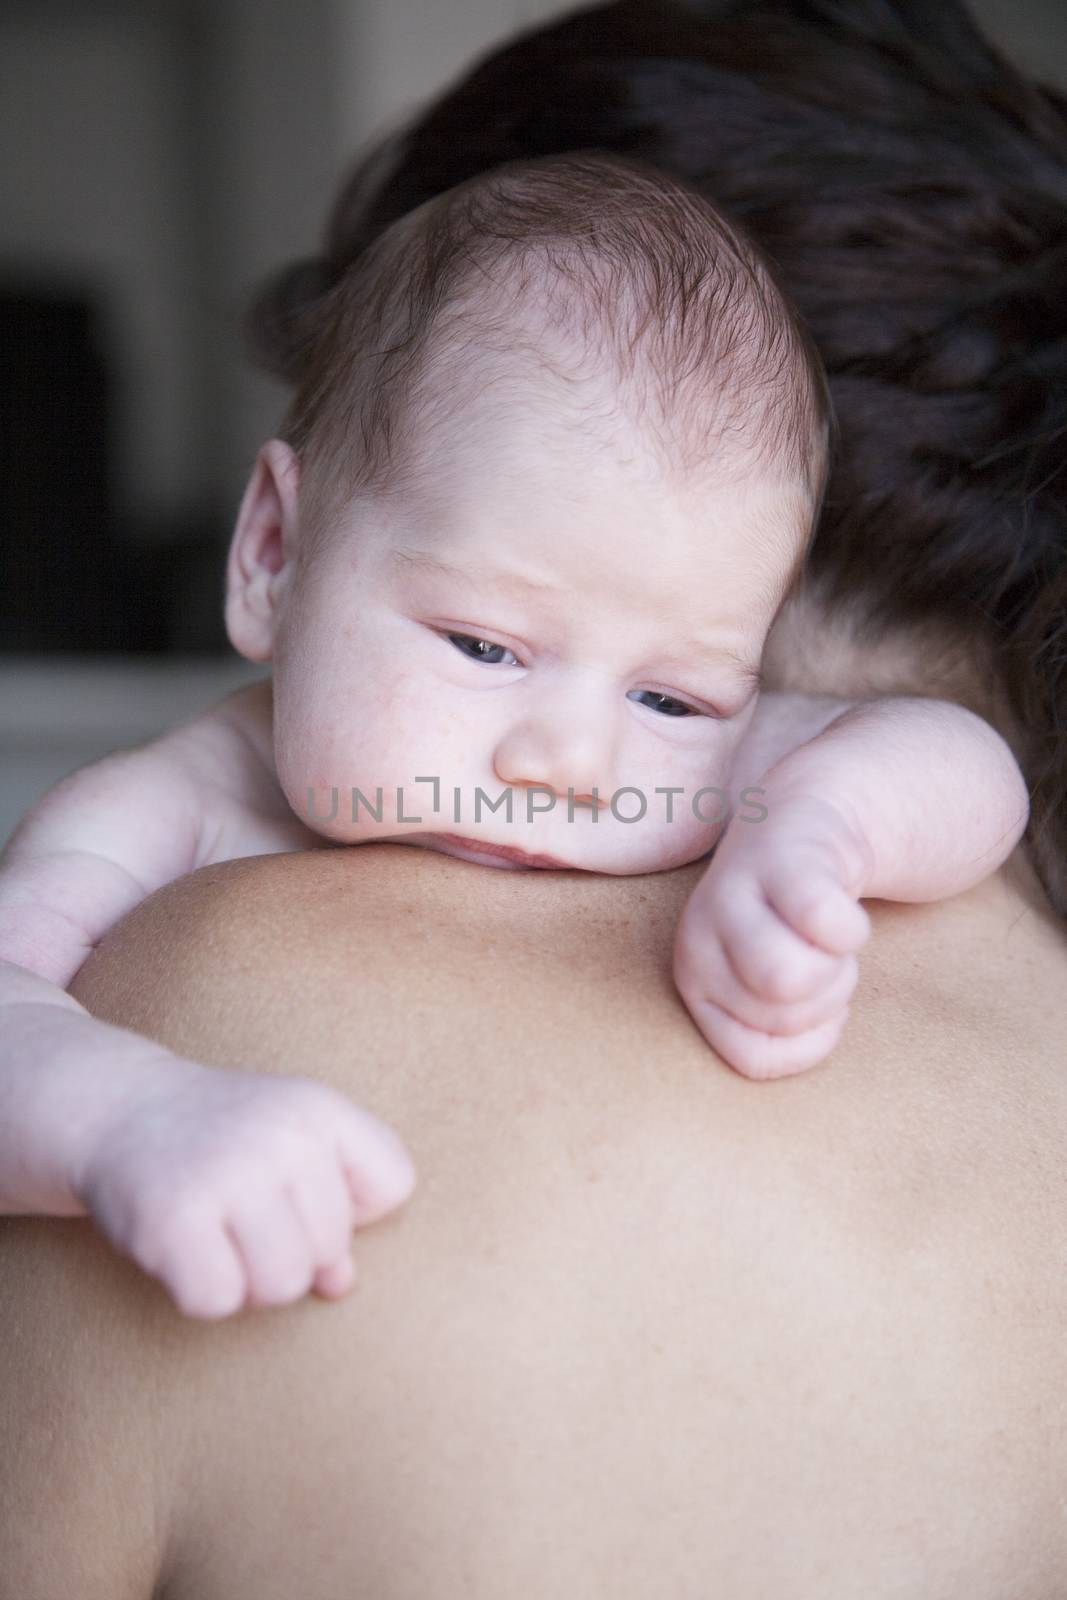 portrait of twenty days age baby naked bare embraced open eyes looking with arms on shoulder of brunette woman mother cradling